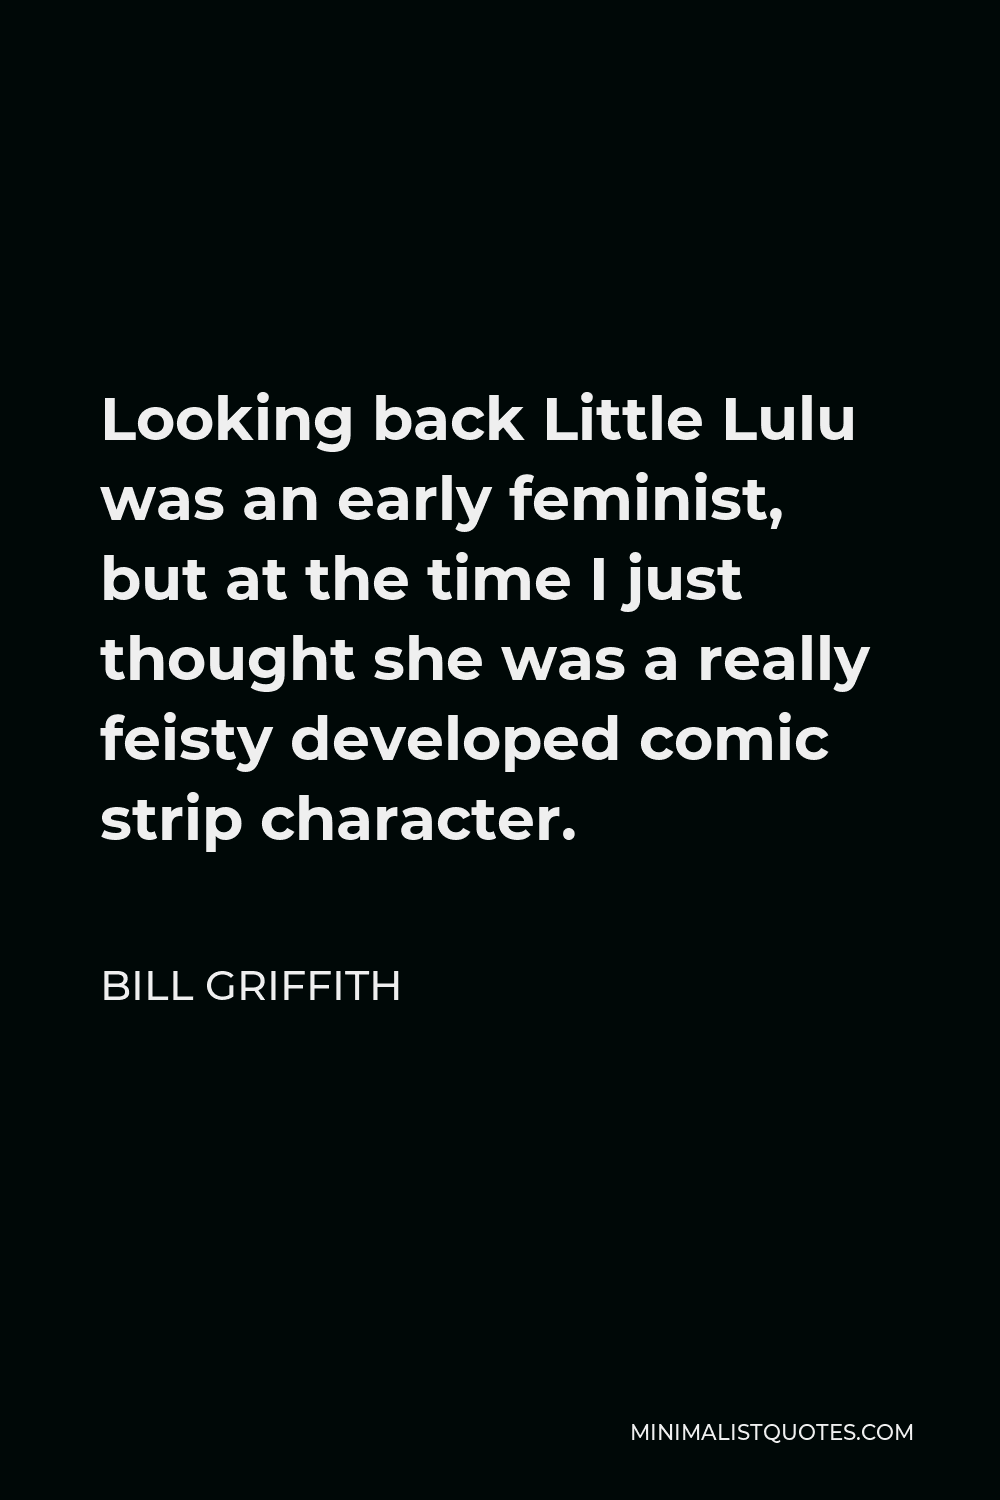 Bill Griffith Quote - Looking back Little Lulu was an early feminist, but at the time I just thought she was a really feisty developed comic strip character.